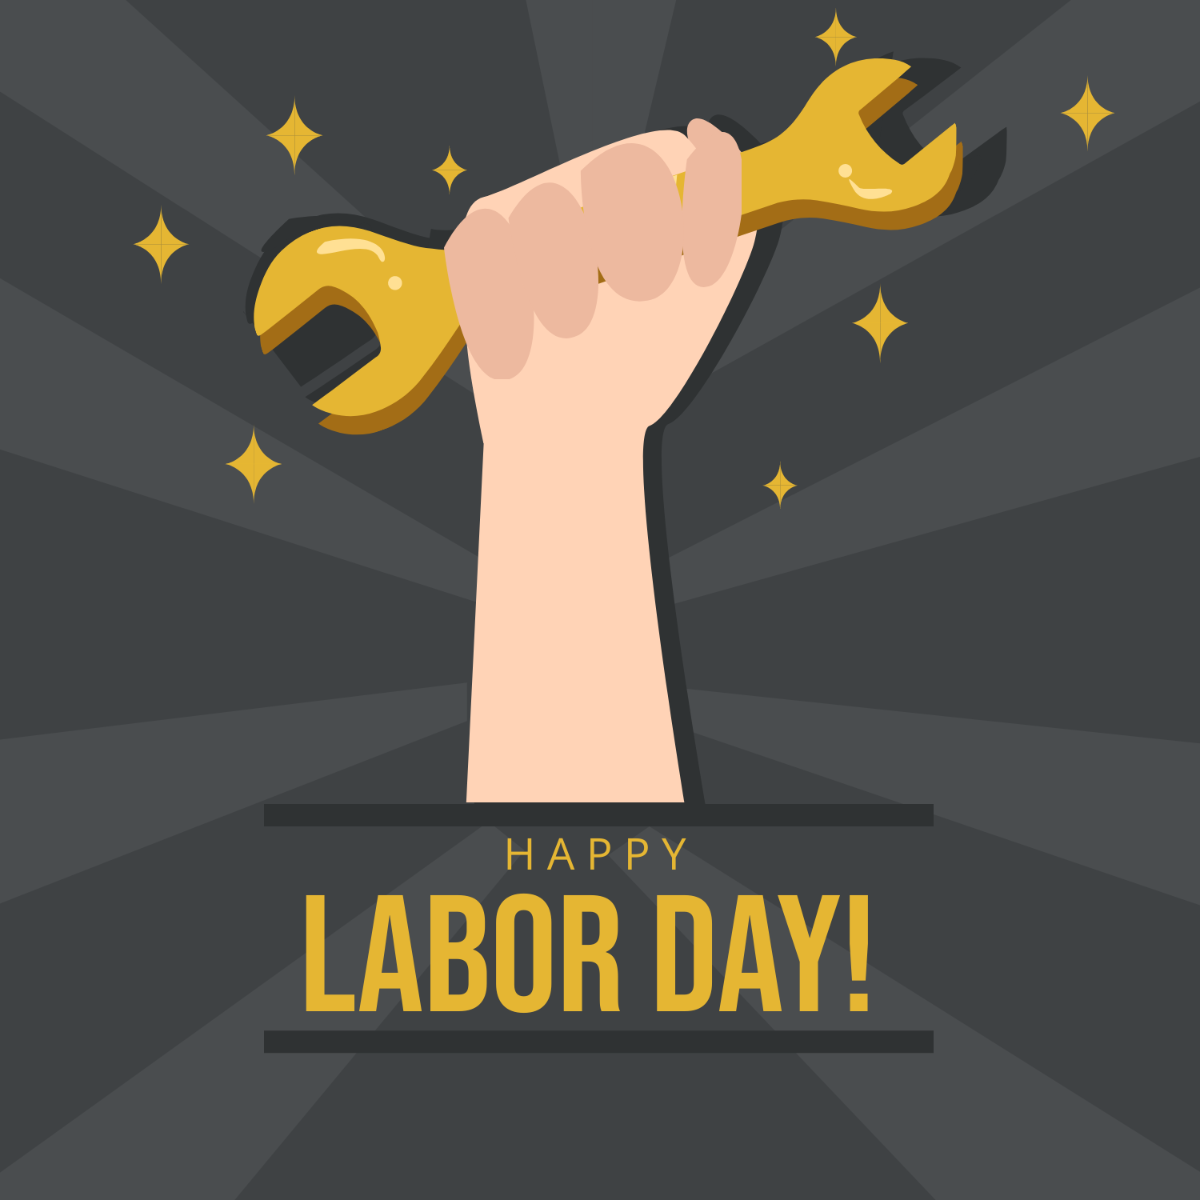 Free Labor Day Illustration Clipart Template